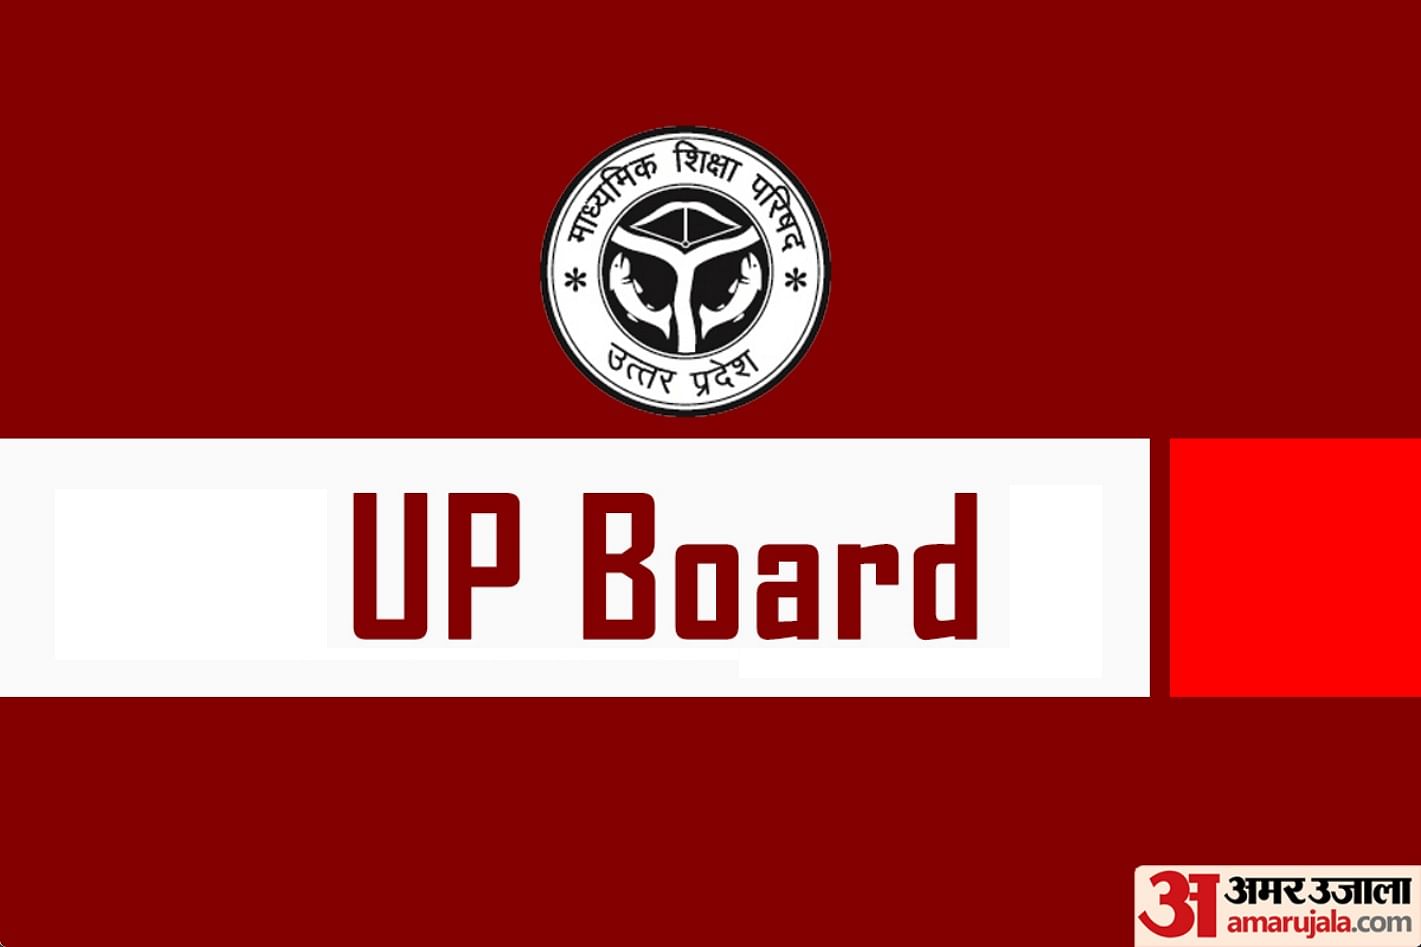 UP Board Date Sheet 2022 Released For Class 10 and 12 Exams, Check Complete Schedule Here